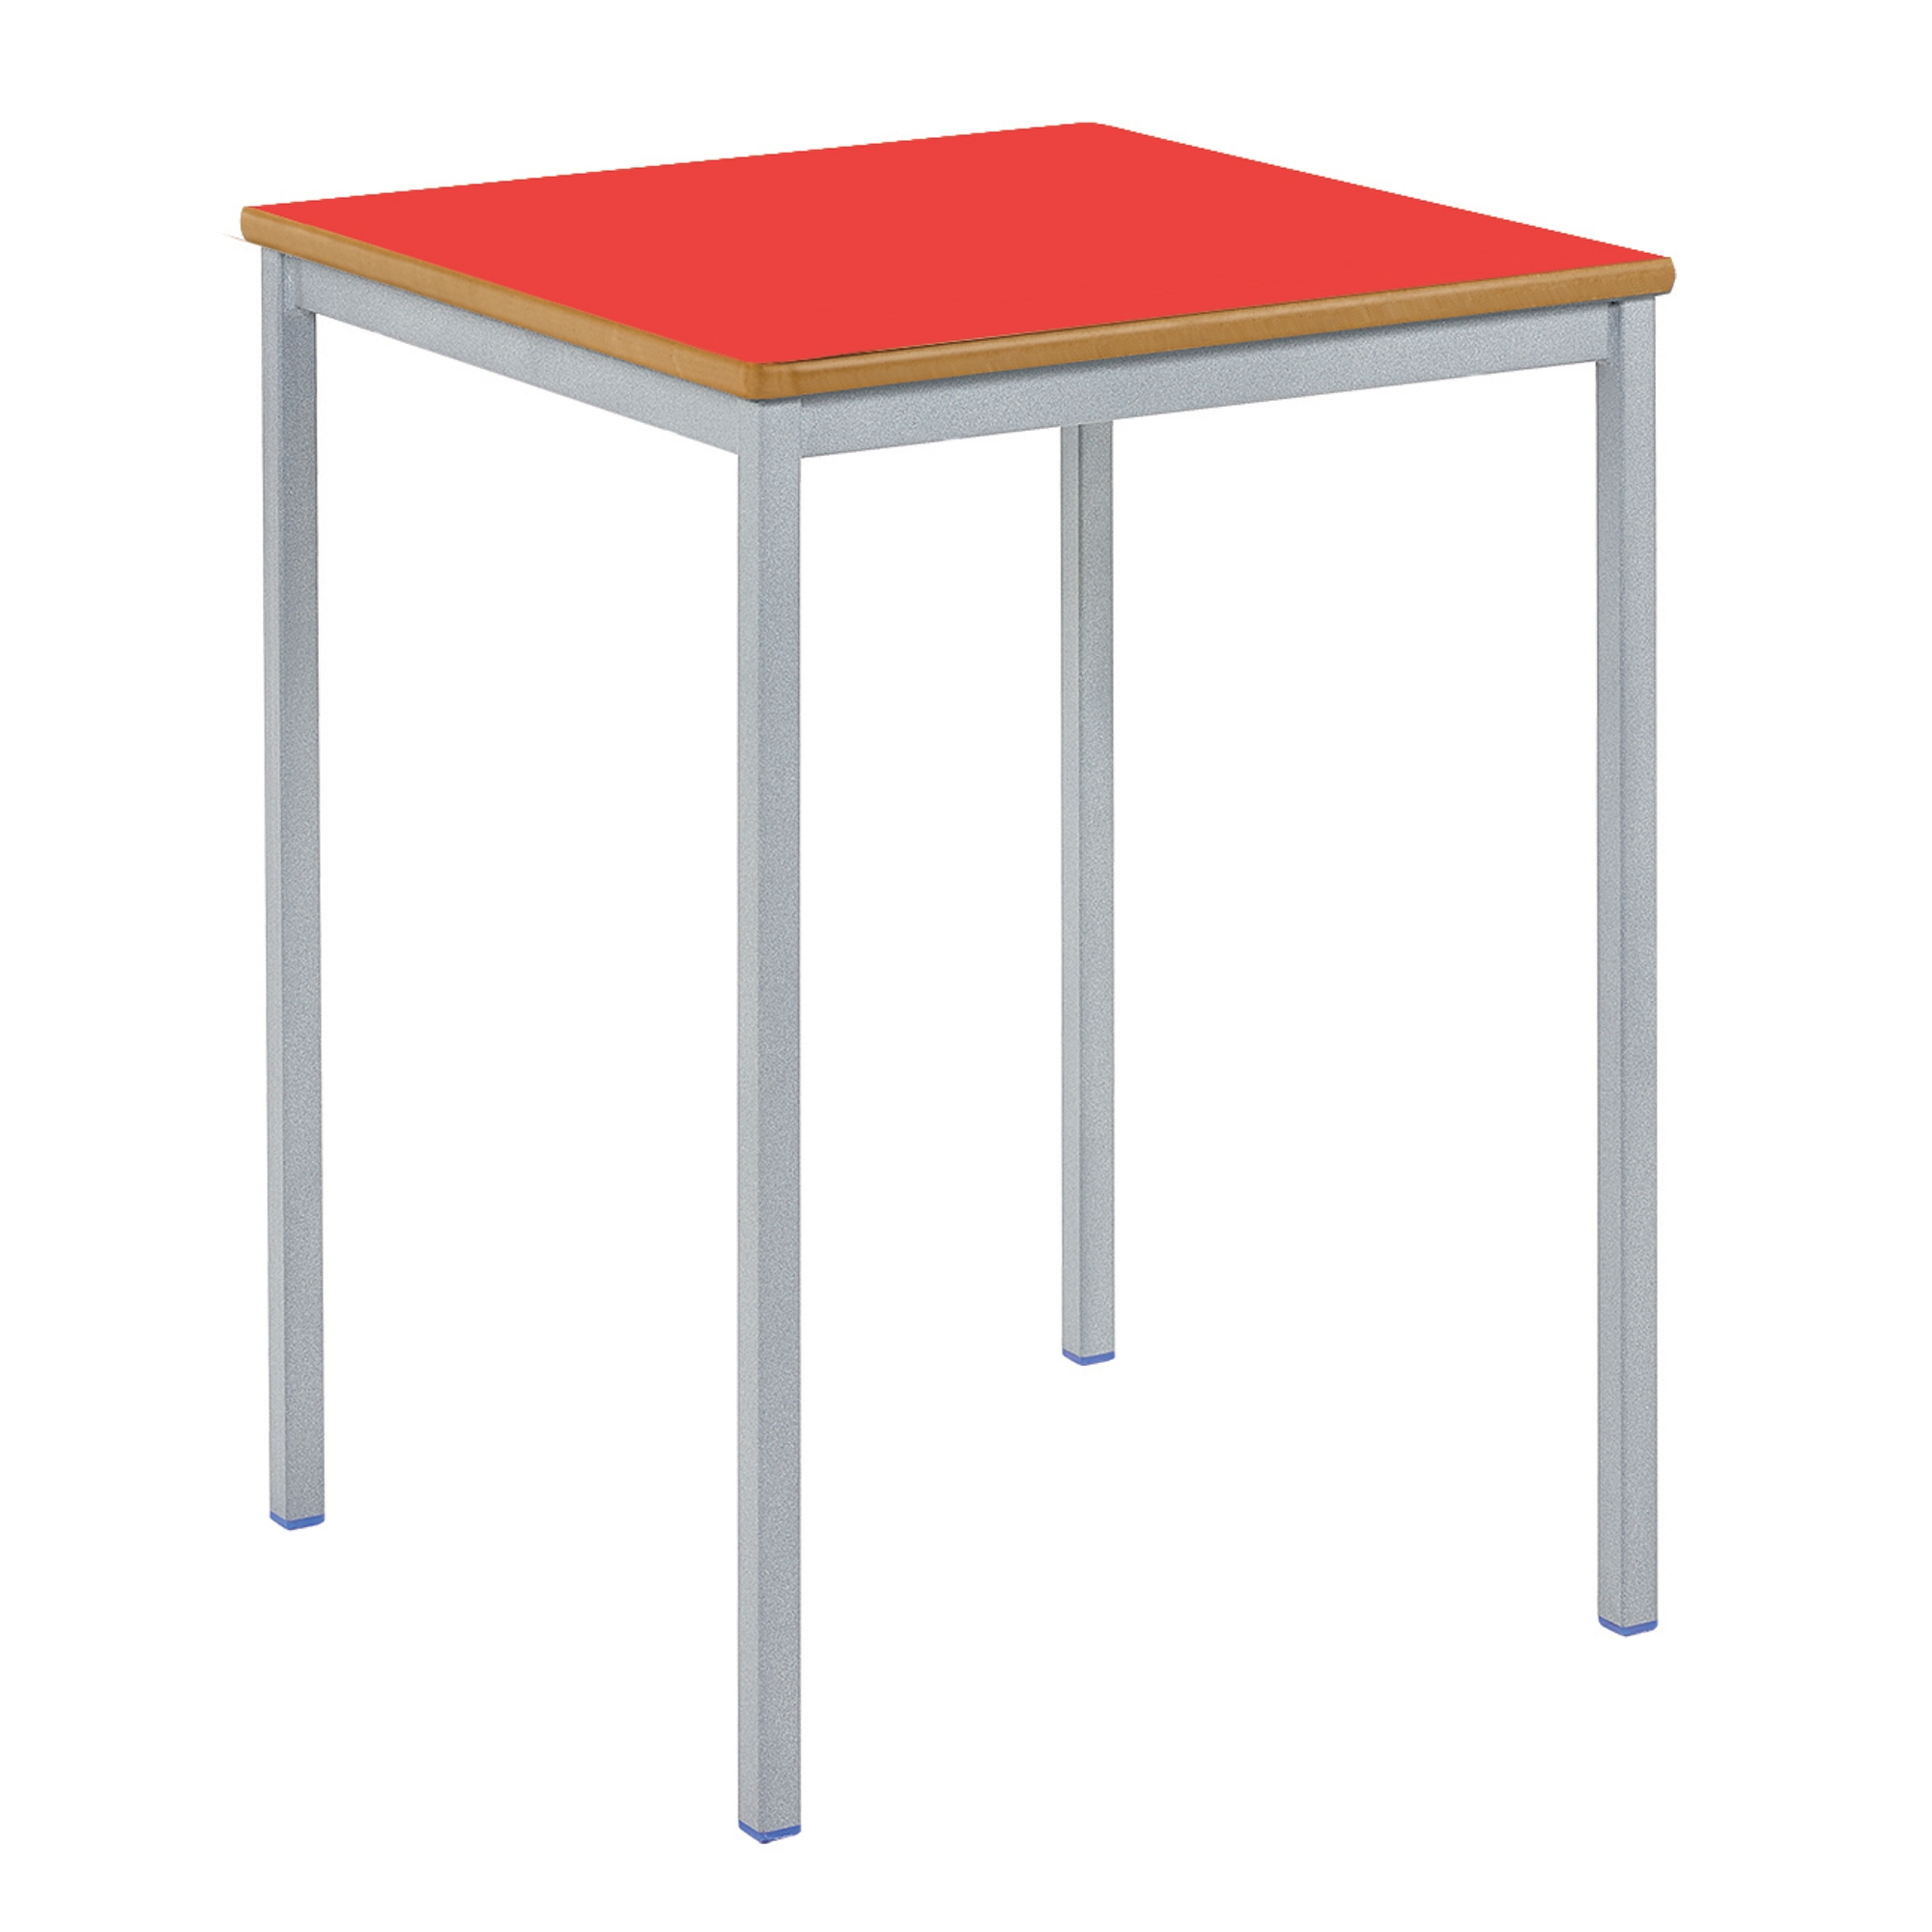 Classmates Square Fully Welded Classroom Table - 600 x 600 x 530mm - Red